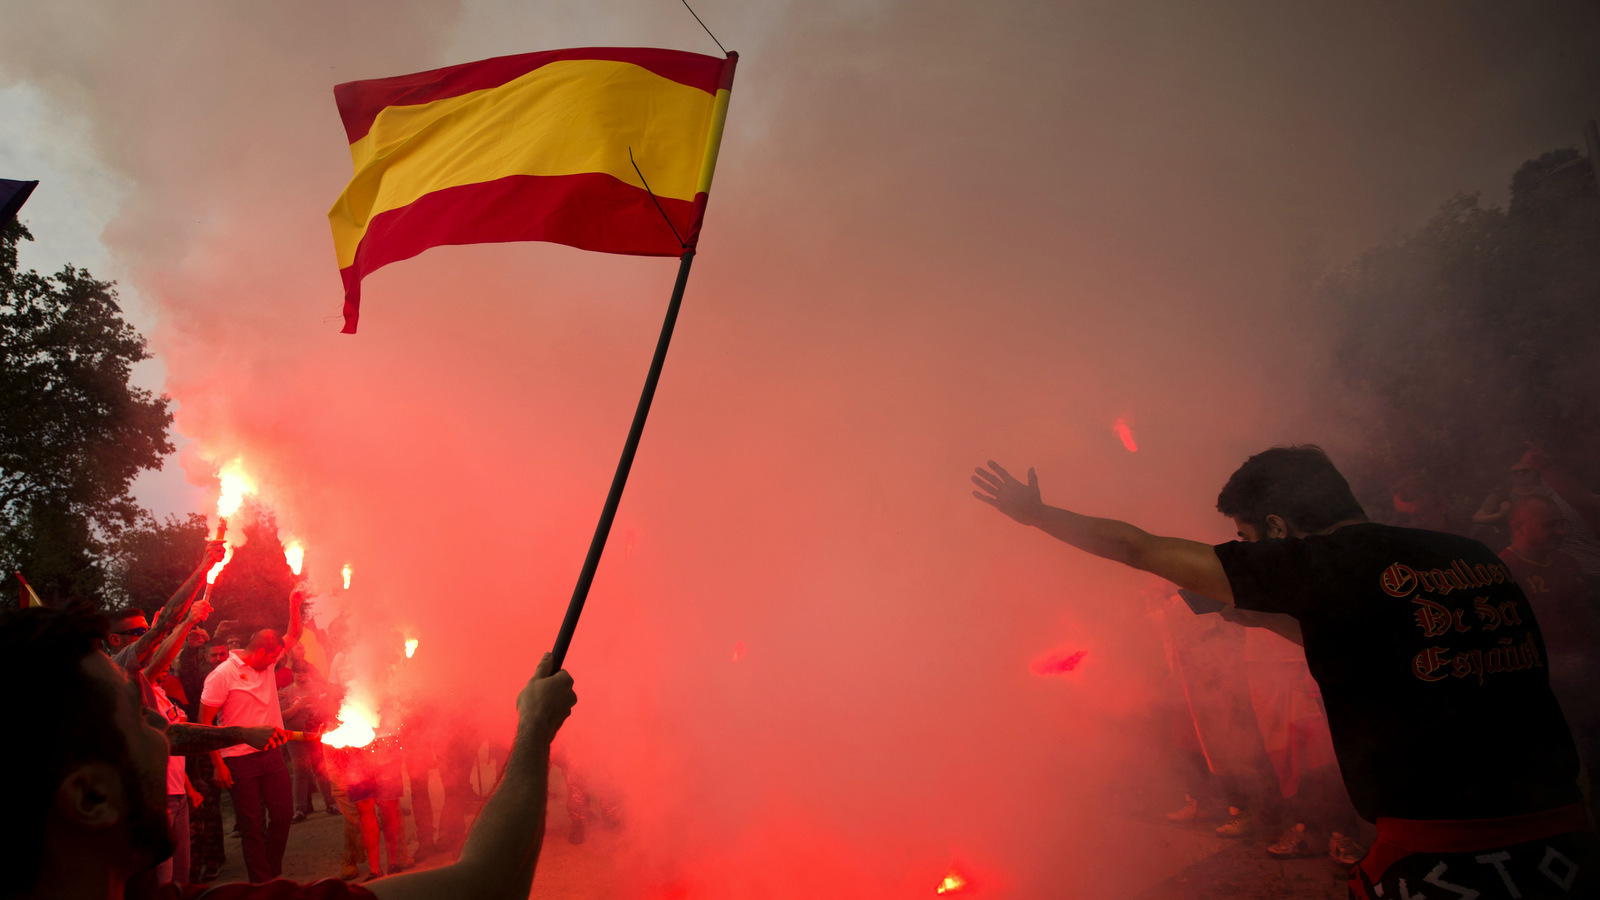 Extreme right-wing demonstrators burn Esteladas or independence flags as they hold an alternative celebration for Spain's National Day in Barcelona, Spain, Thursday, Oct. 12, 2017. A few hundred demonstrators attended alternative celebrations as thousands of other Spaniards gathered in Barcelona as Spain's celebrates its national day amid one of the country's biggest crises ever as its powerful northeastern region of Catalonia threatens independence. (AP Photo/Emilio Morenatti)